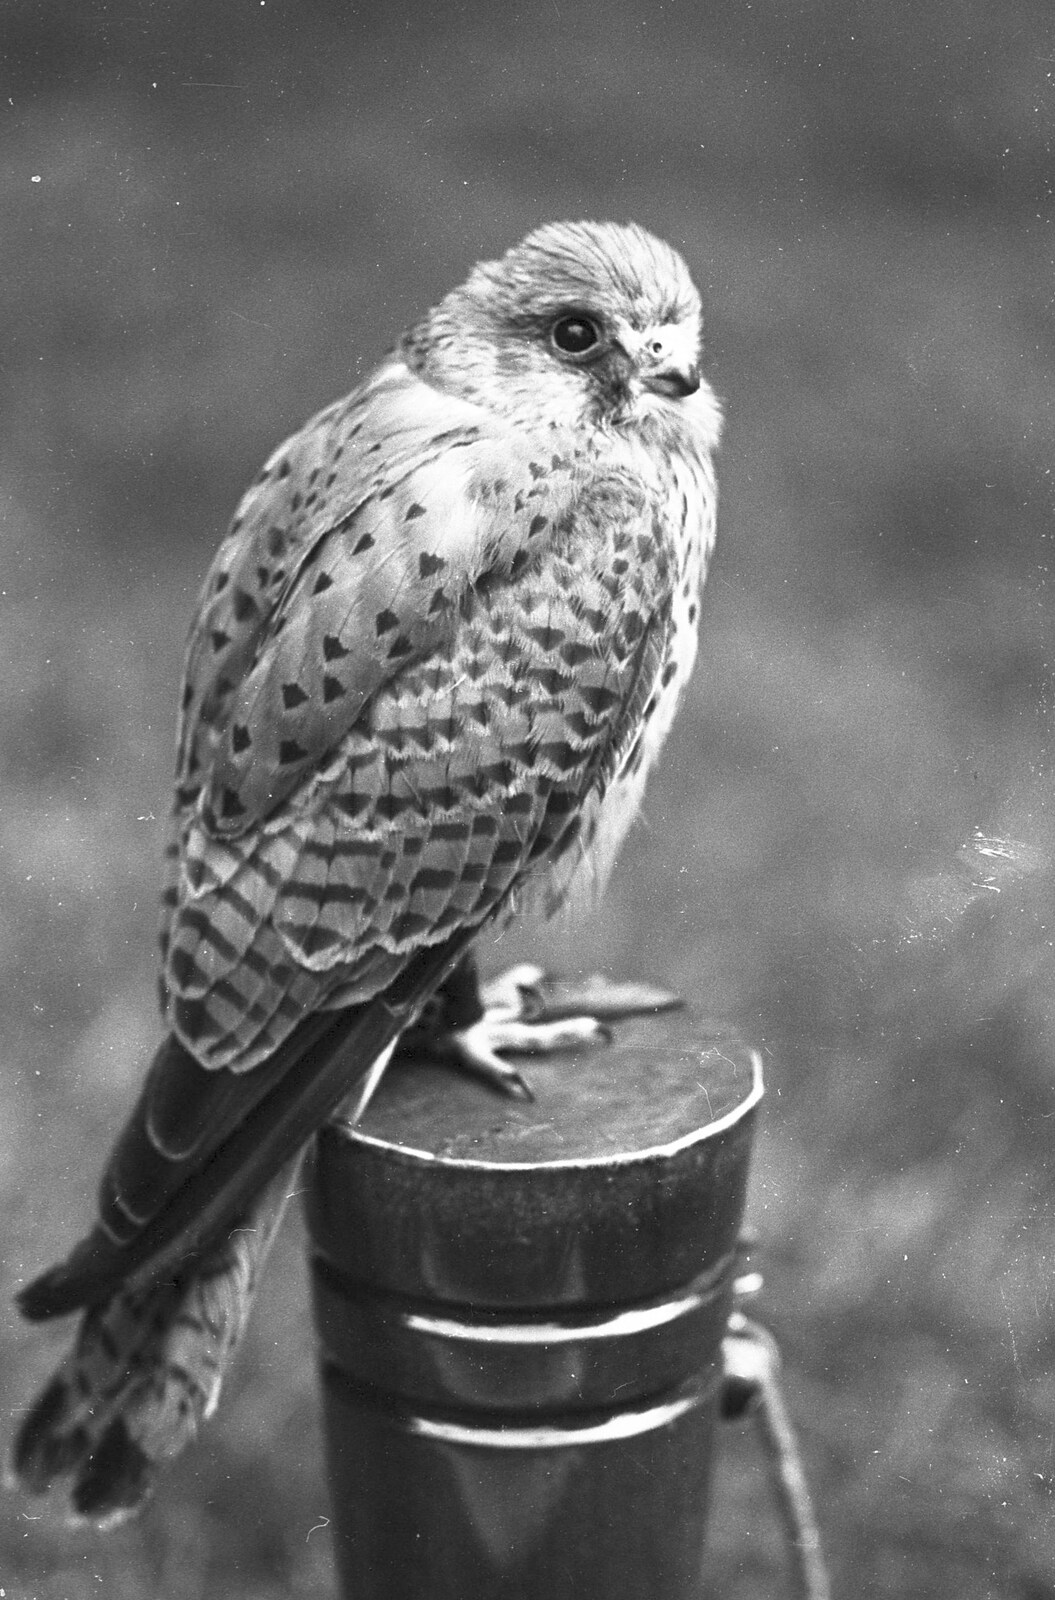 A kestrel from The Royal Norfolk Show, Costessey Showground, Norwich - June 20th 1994